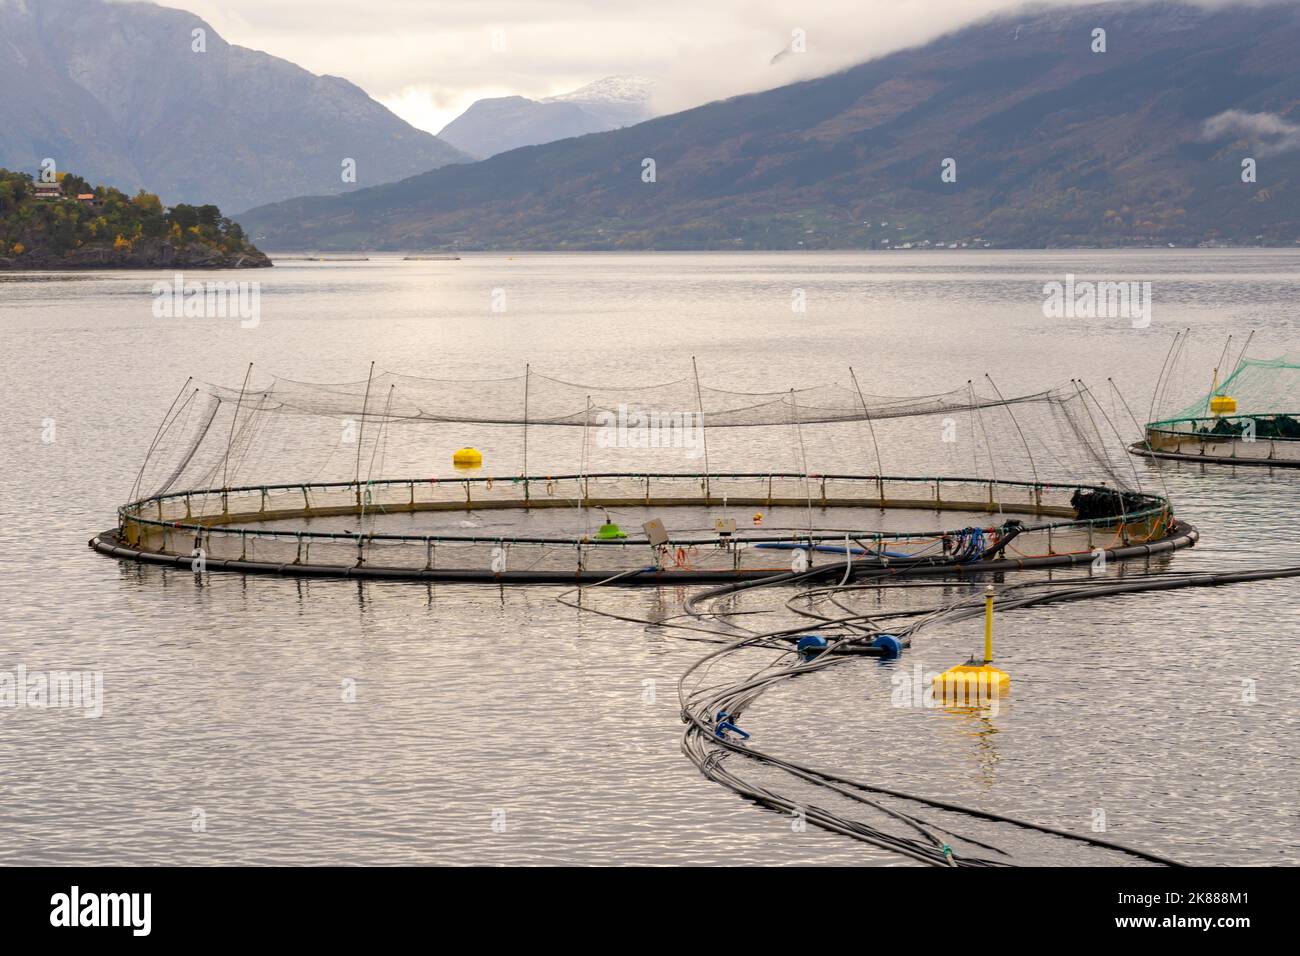 A salmon fish farm in Norway. Norway is the biggest producer of farmed salmon in the world. Stock Photo